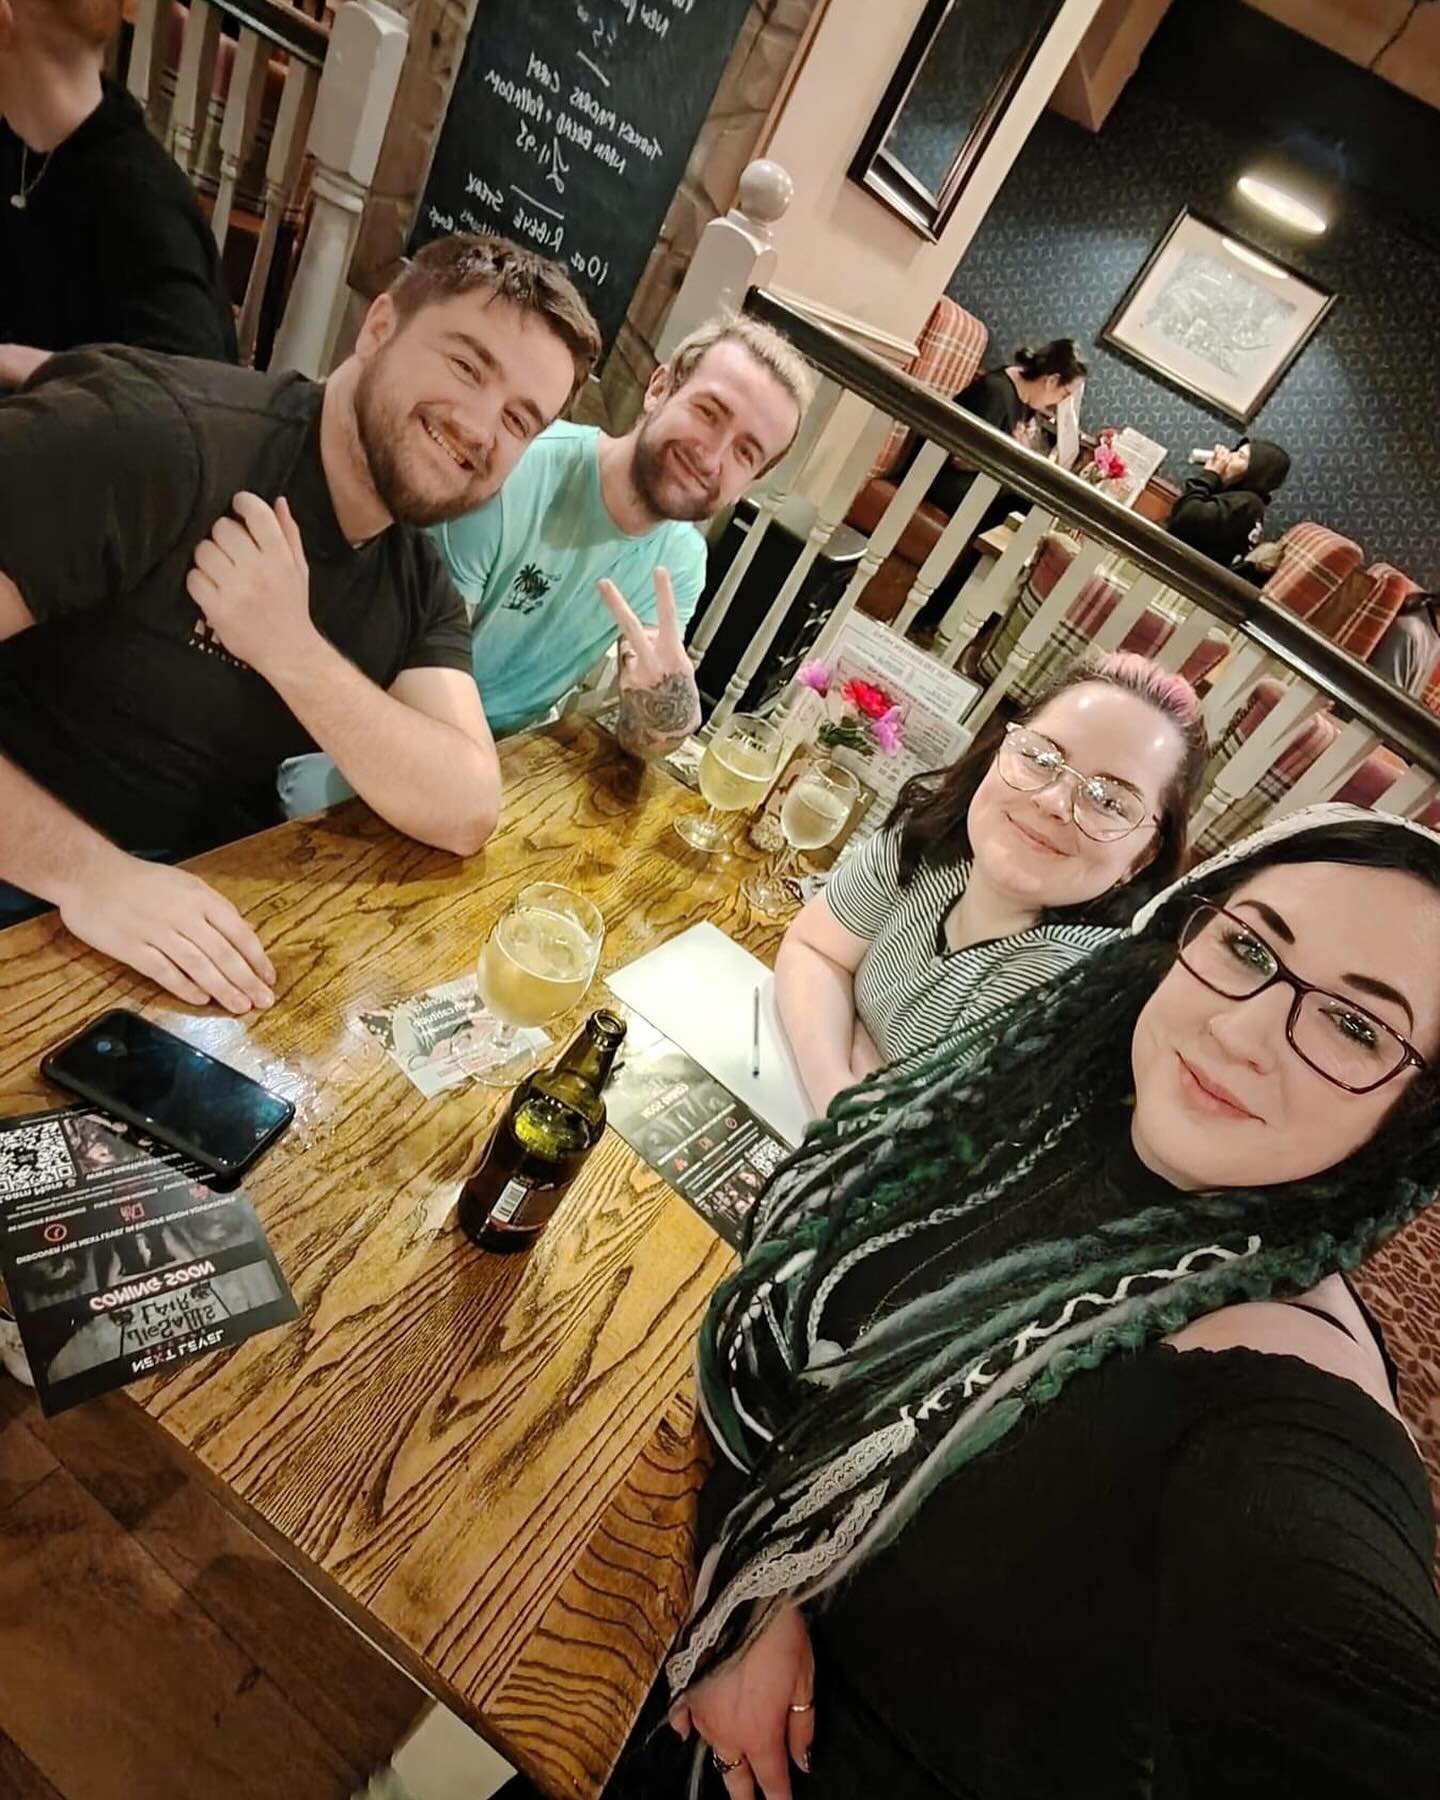 Escape Ipswich is ready for the horror quiz at @the_salutation_ipswich . Hosted by @nextlevelescapeuk 🃏

We are ready to win 🤣💪✨ 

#escape #horror #horrorquiz #pubquiz #doyouwannaplayagame